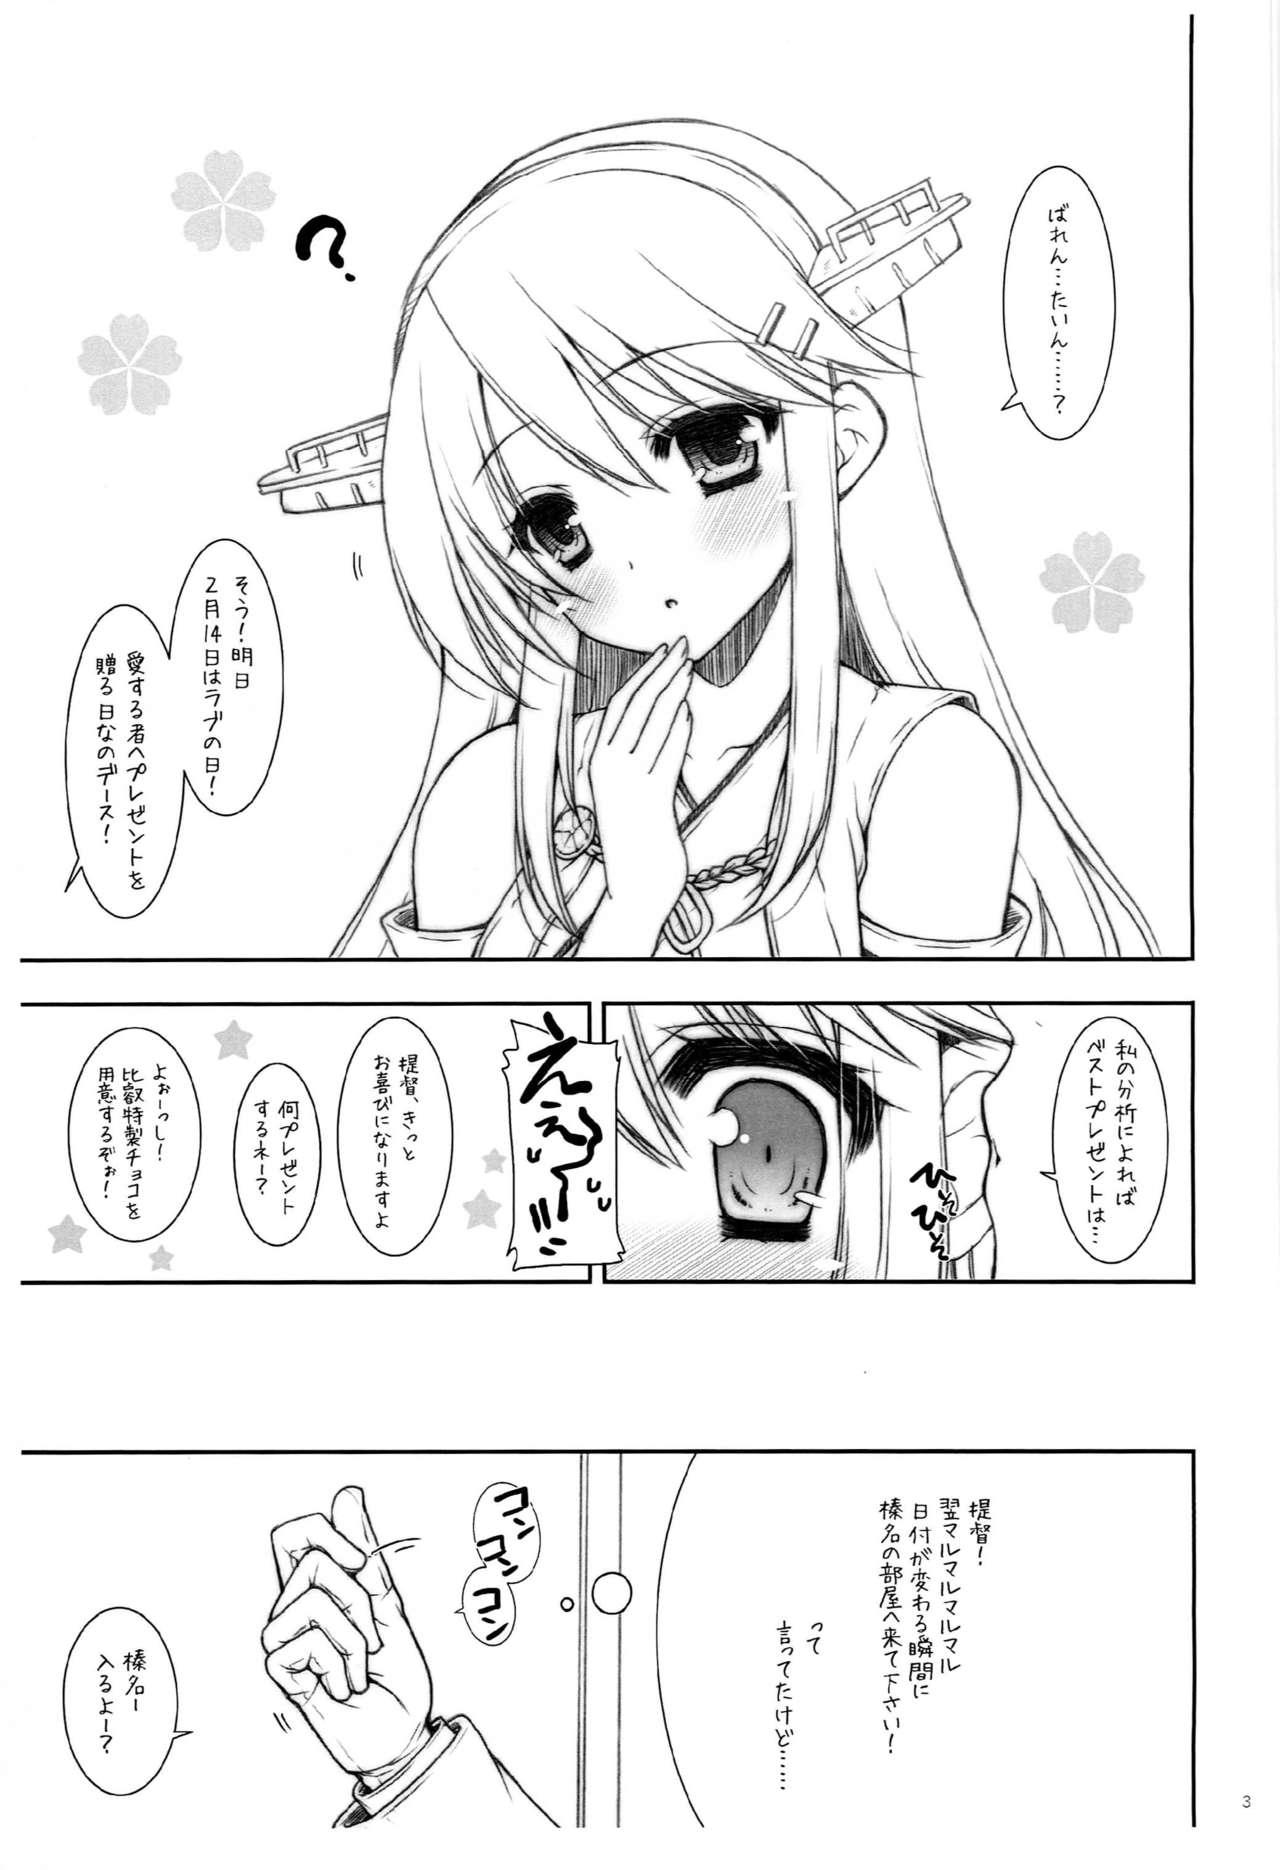 Squirters ShiguColle 58 - Kantai collection Pussylick - Page 3